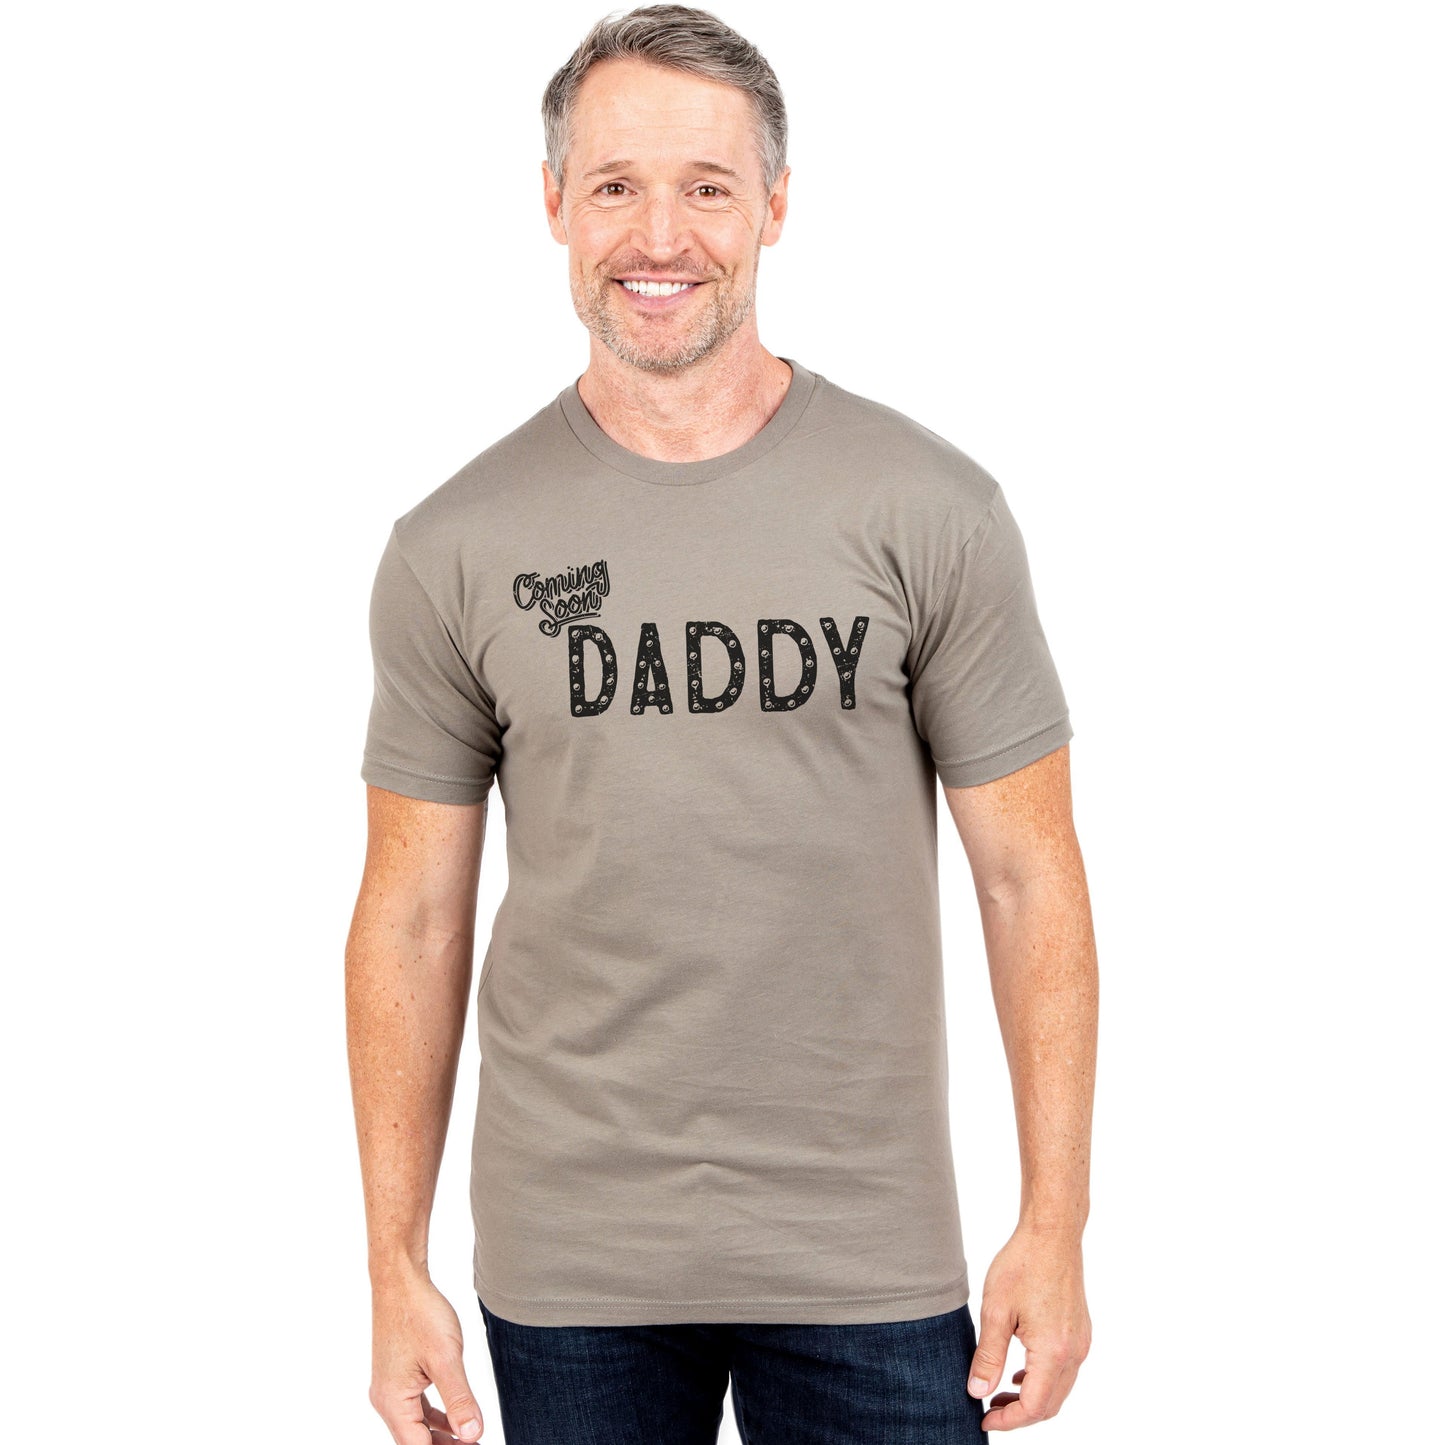 Coming Soon Daddy - Stories You Can Wear by Thread Tank